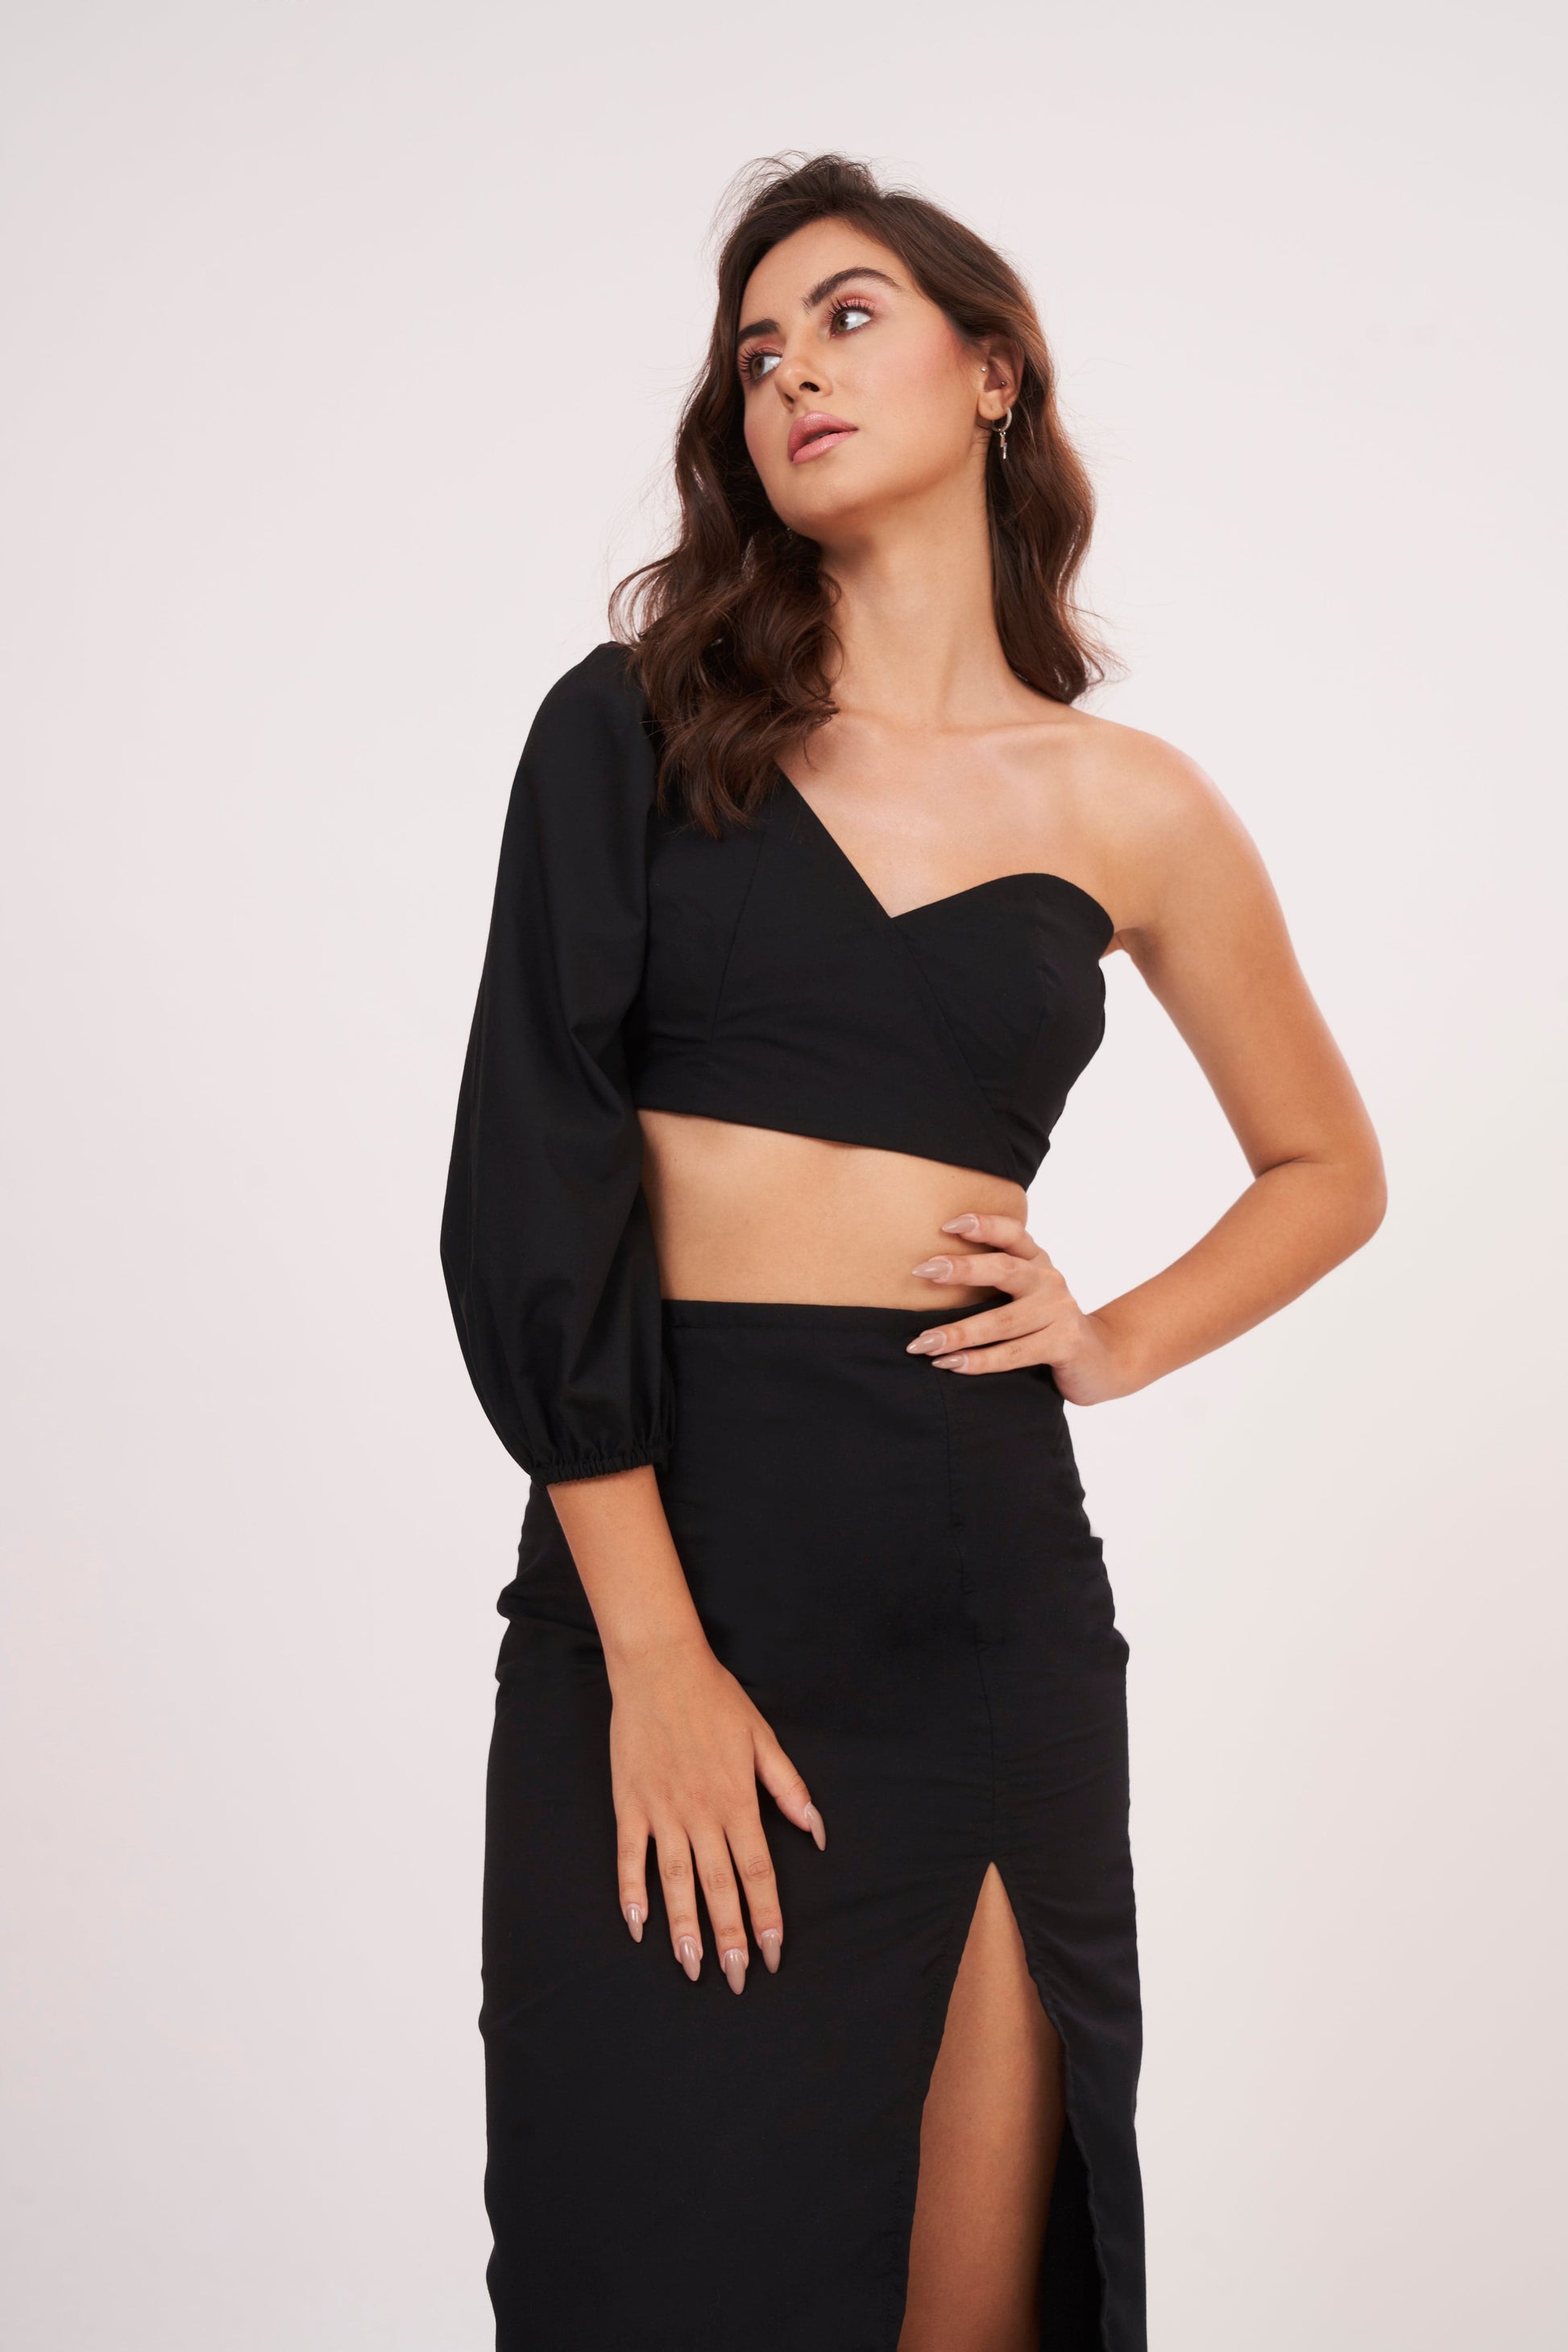 Elegant one-sleeve black top with asymmetrical design, draping across chest and shoulder, made from luxurious muslin fabric